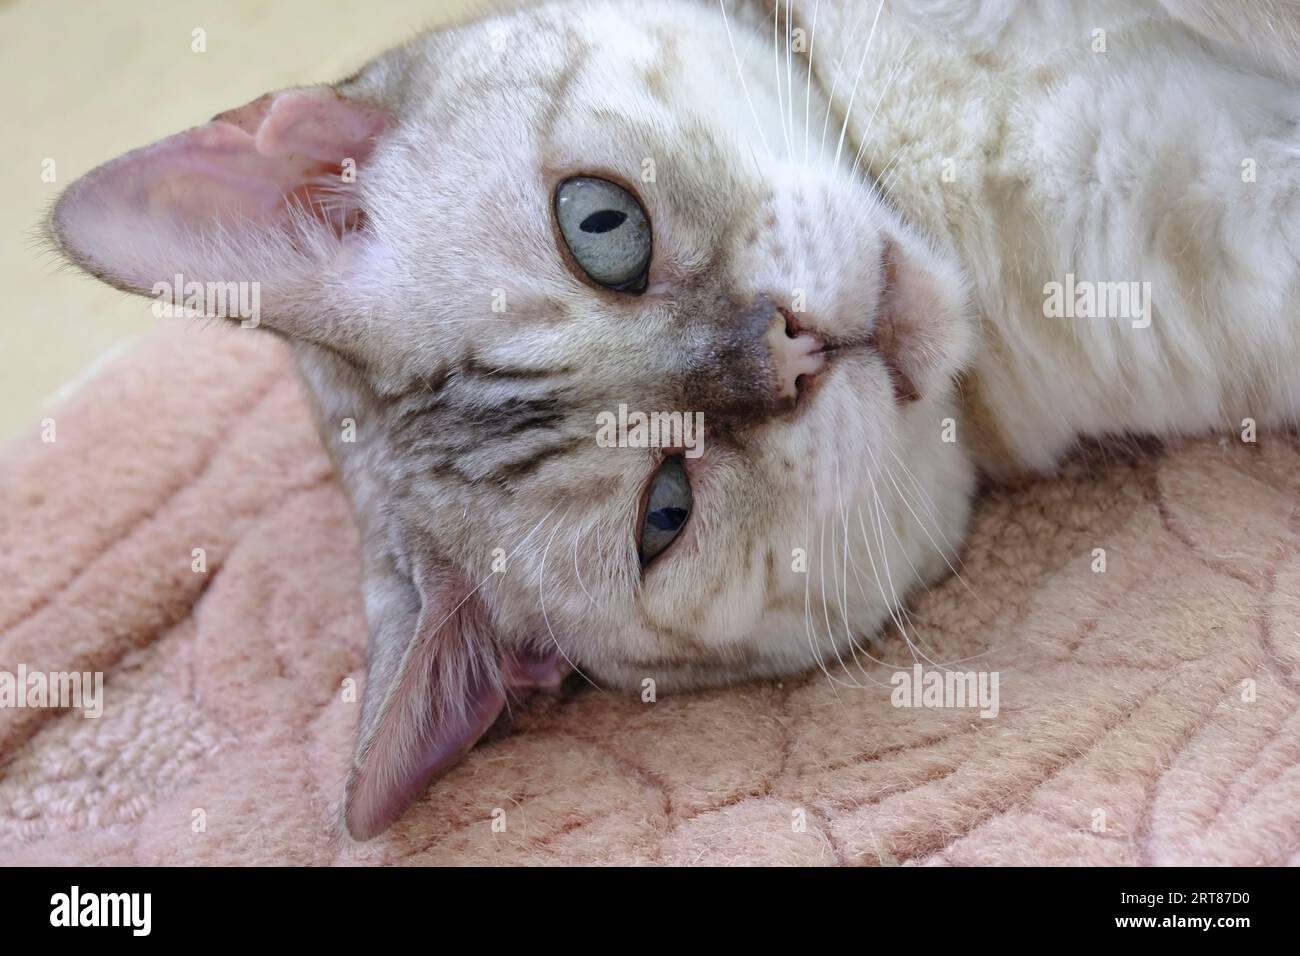 Adult female Snow Rosette Bengal Cat relaxed on rug and looking directly at the camera Stock Photo